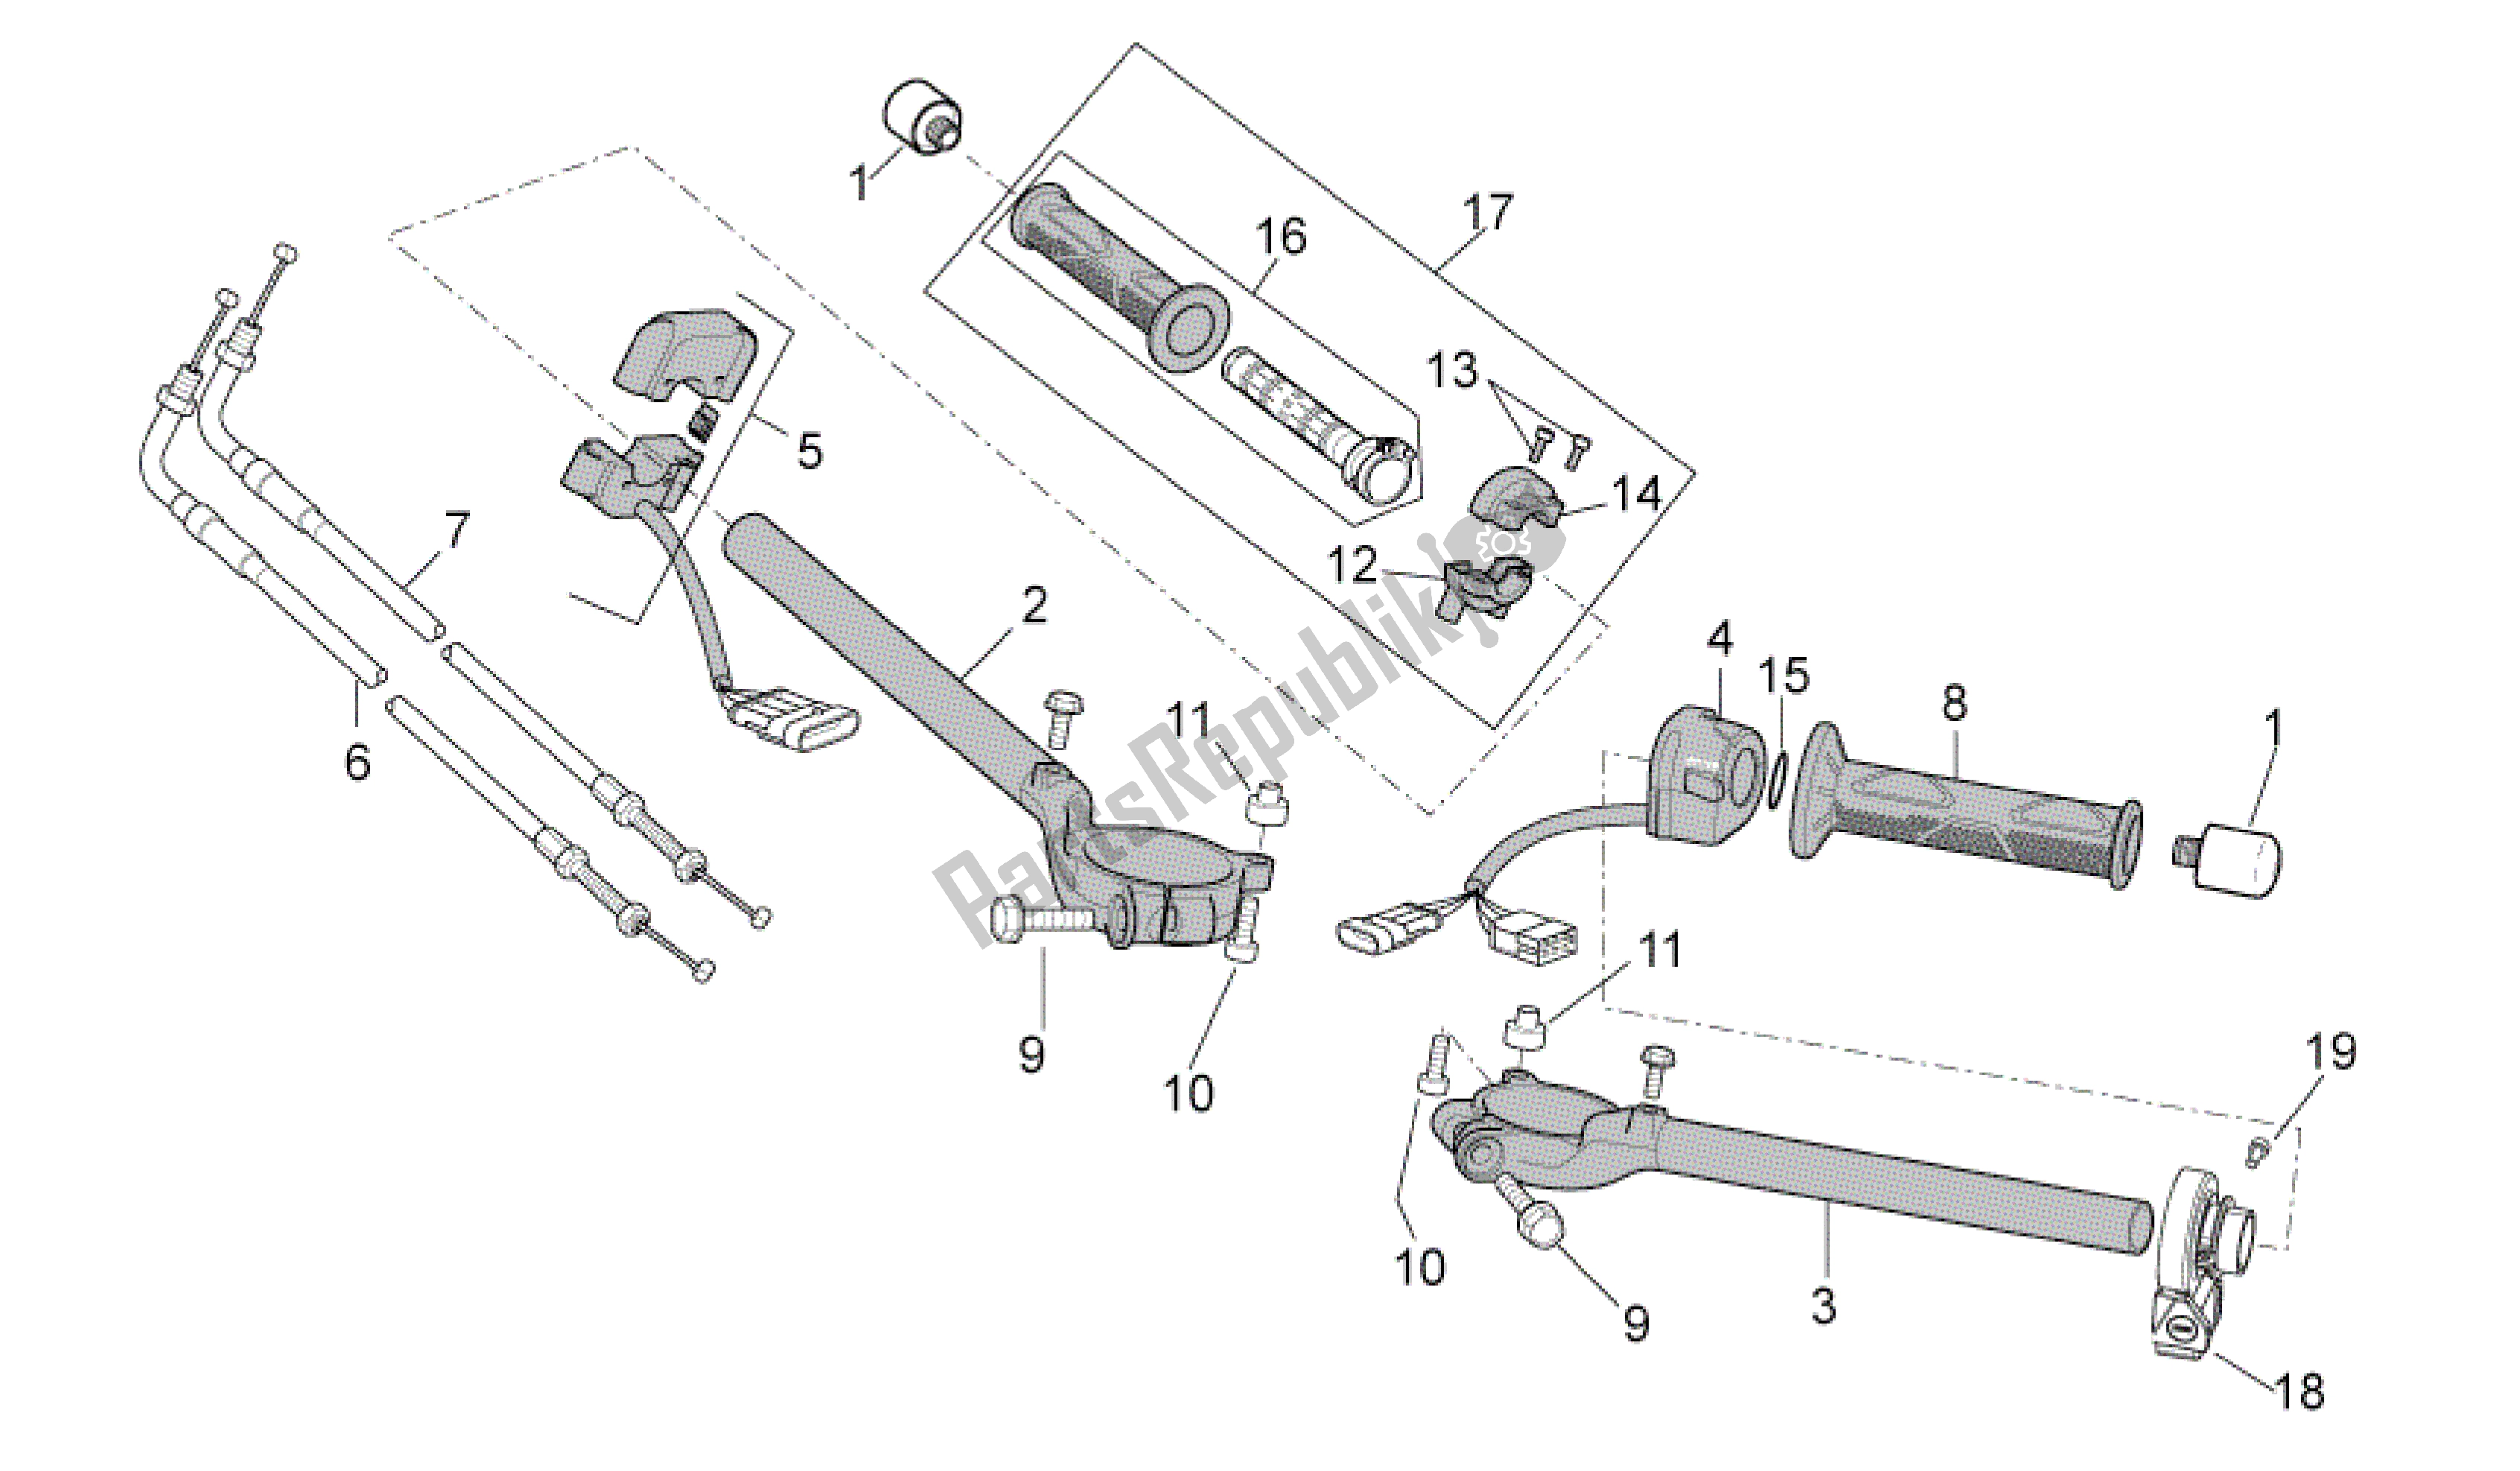 All parts for the Handlebar - Controls of the Aprilia RSV4 Aprc R ABS 3984 1000 2013